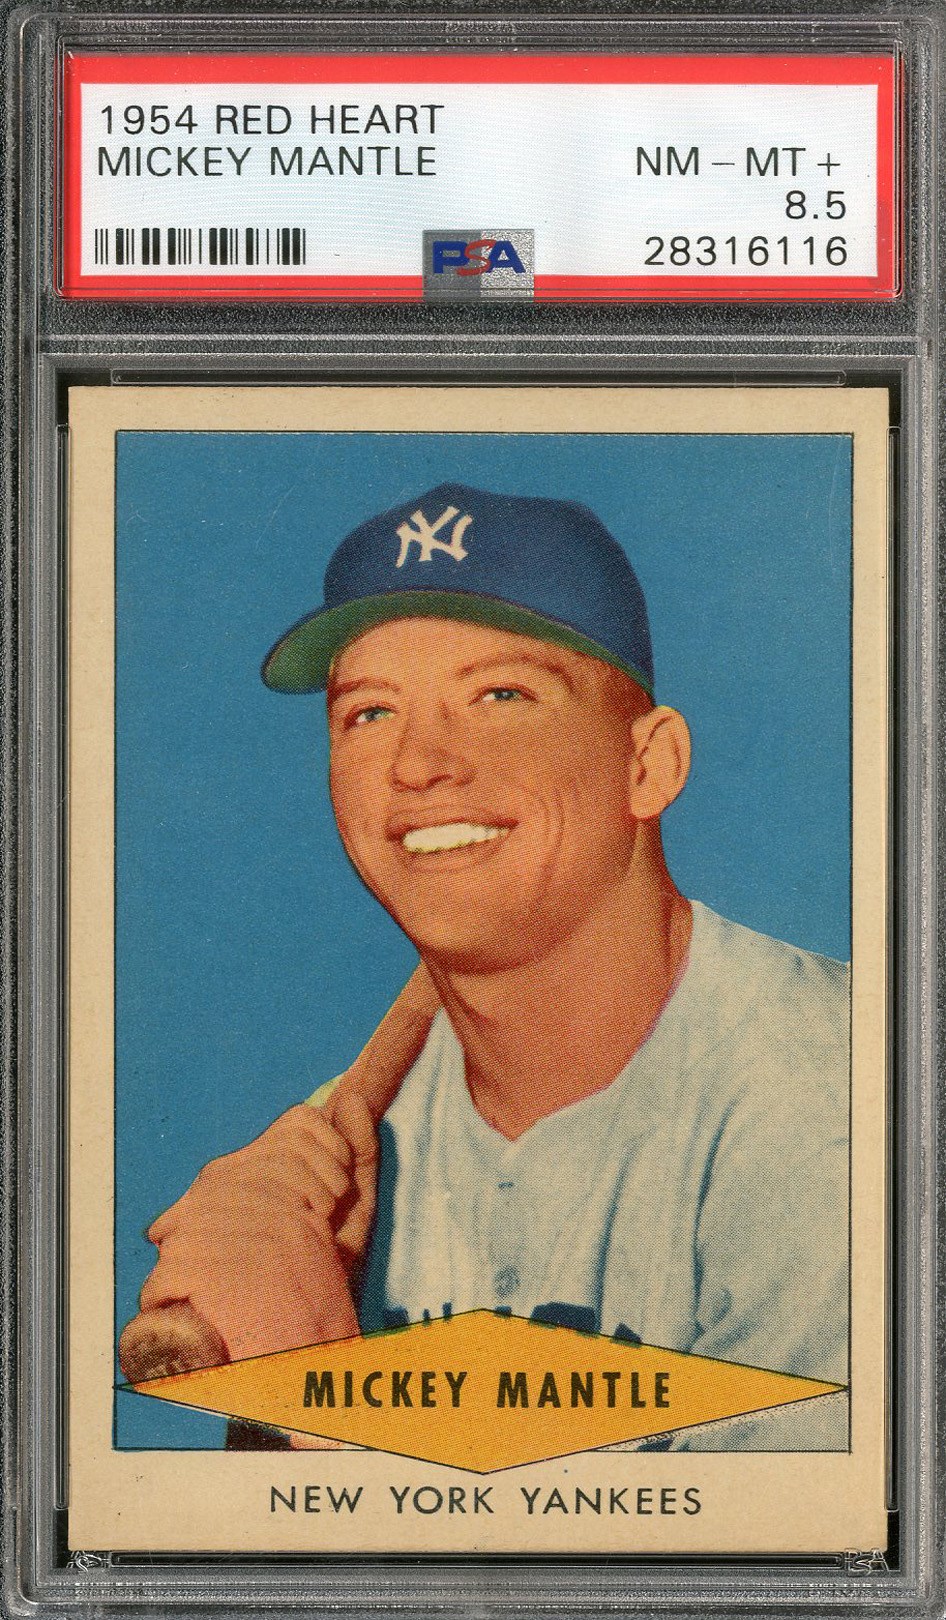 - 1954 Red Heart Mickey Mantle - PSA NM-MT+ 8.5